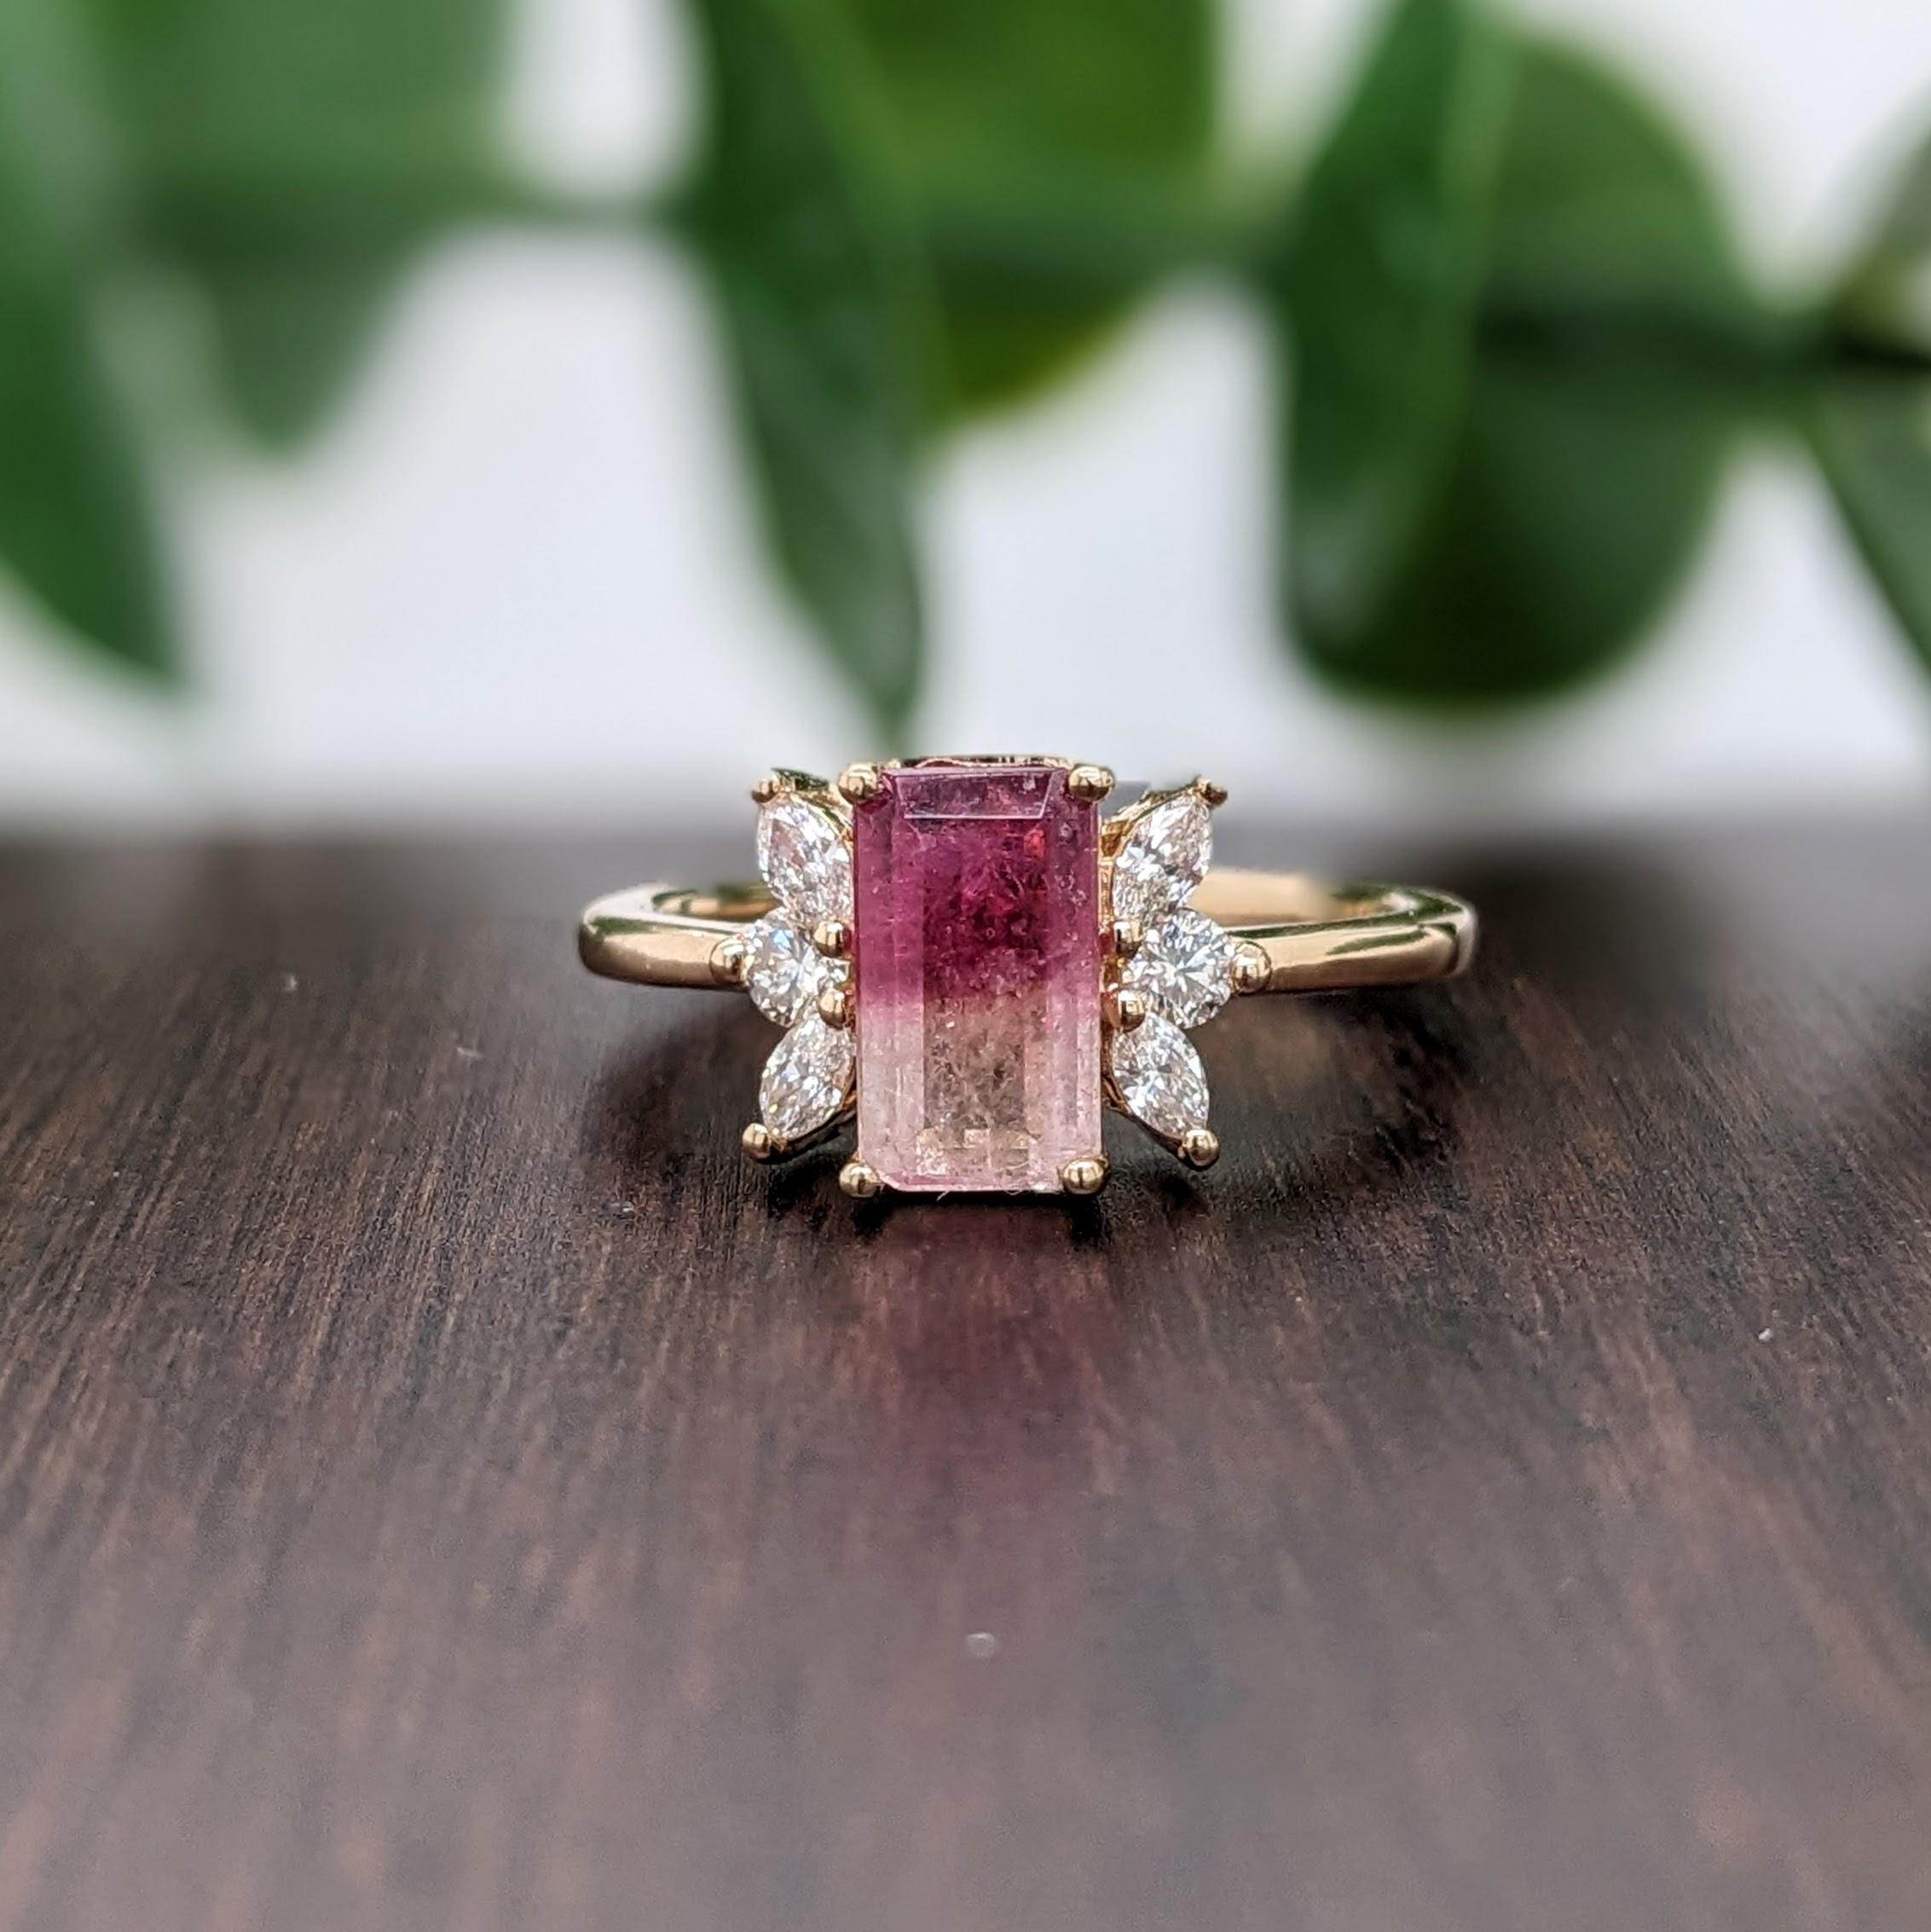 This two hue statement ring features a beautiful bi-color tourmaline in 14k yellow gold with marquise and round diamond accents. A stunning ring design perfect for an eye catching engagement or anniversary. This ring also makes a beautiful